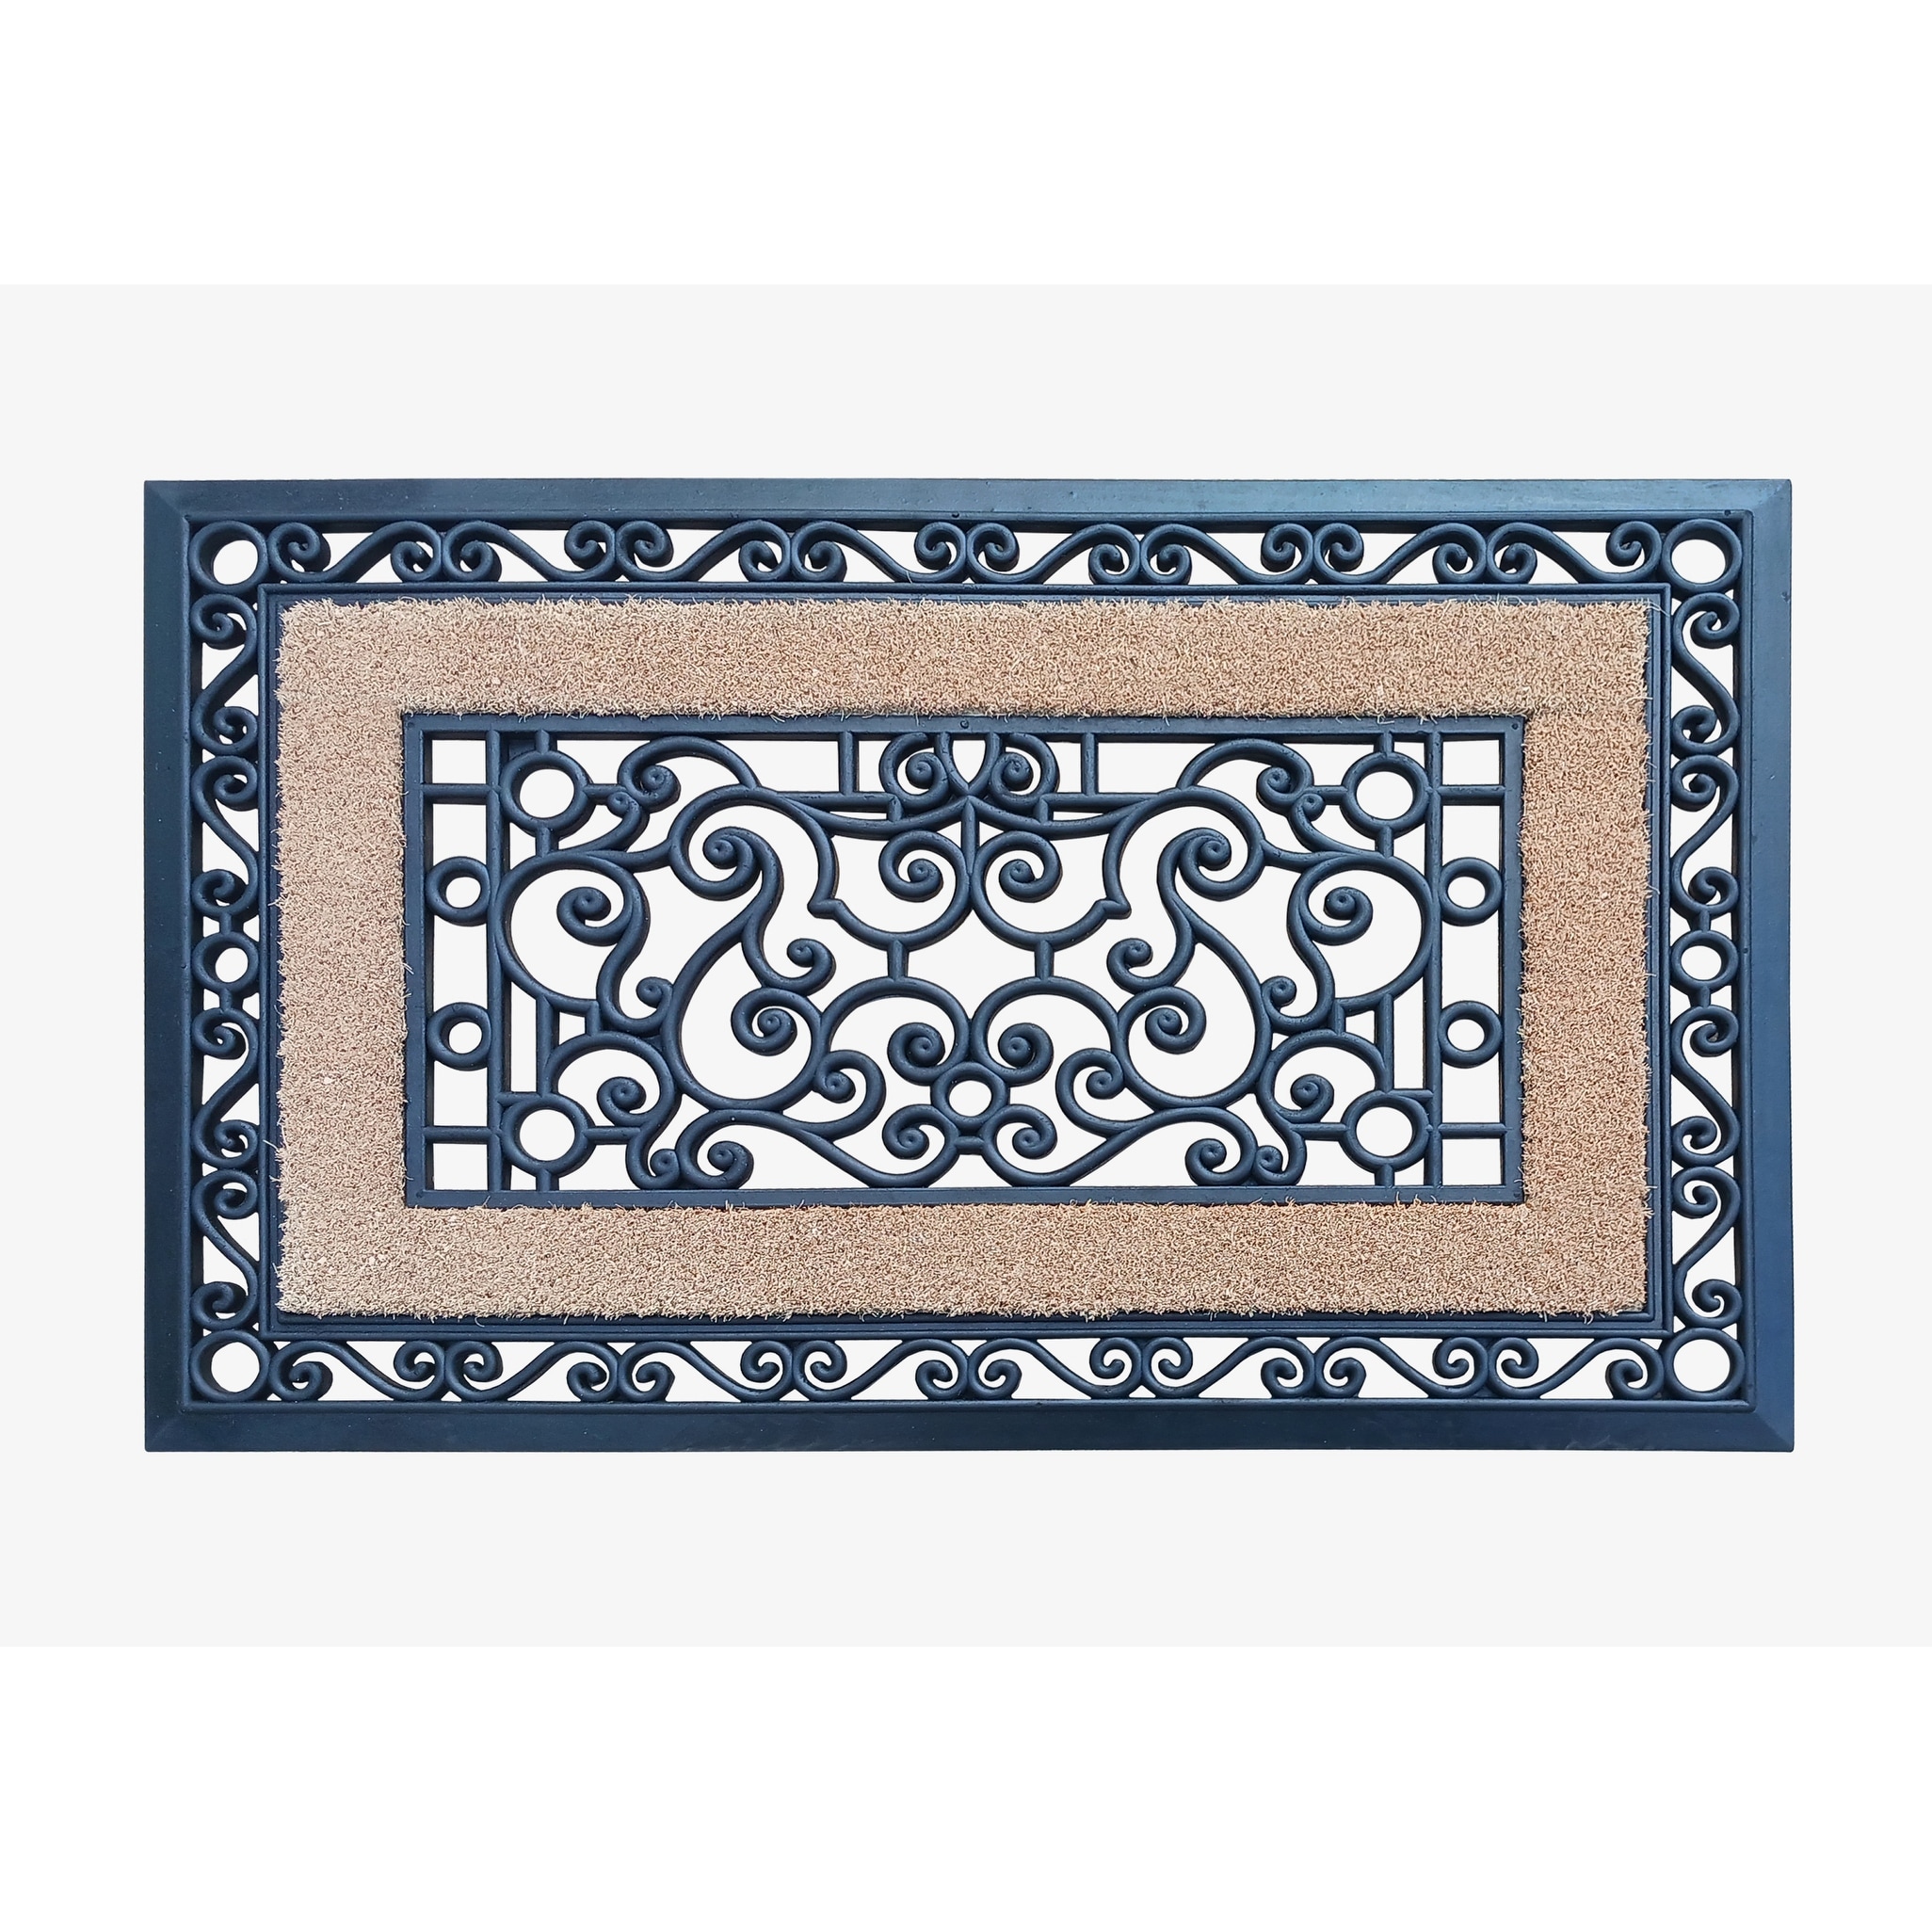 https://ak1.ostkcdn.com/images/products/is/images/direct/af78743fe81ac86403ea08182322120d3902d0b3/A1HC-Modern-Indoor-Outdoor-Rubber-Grill-Doormat.jpg